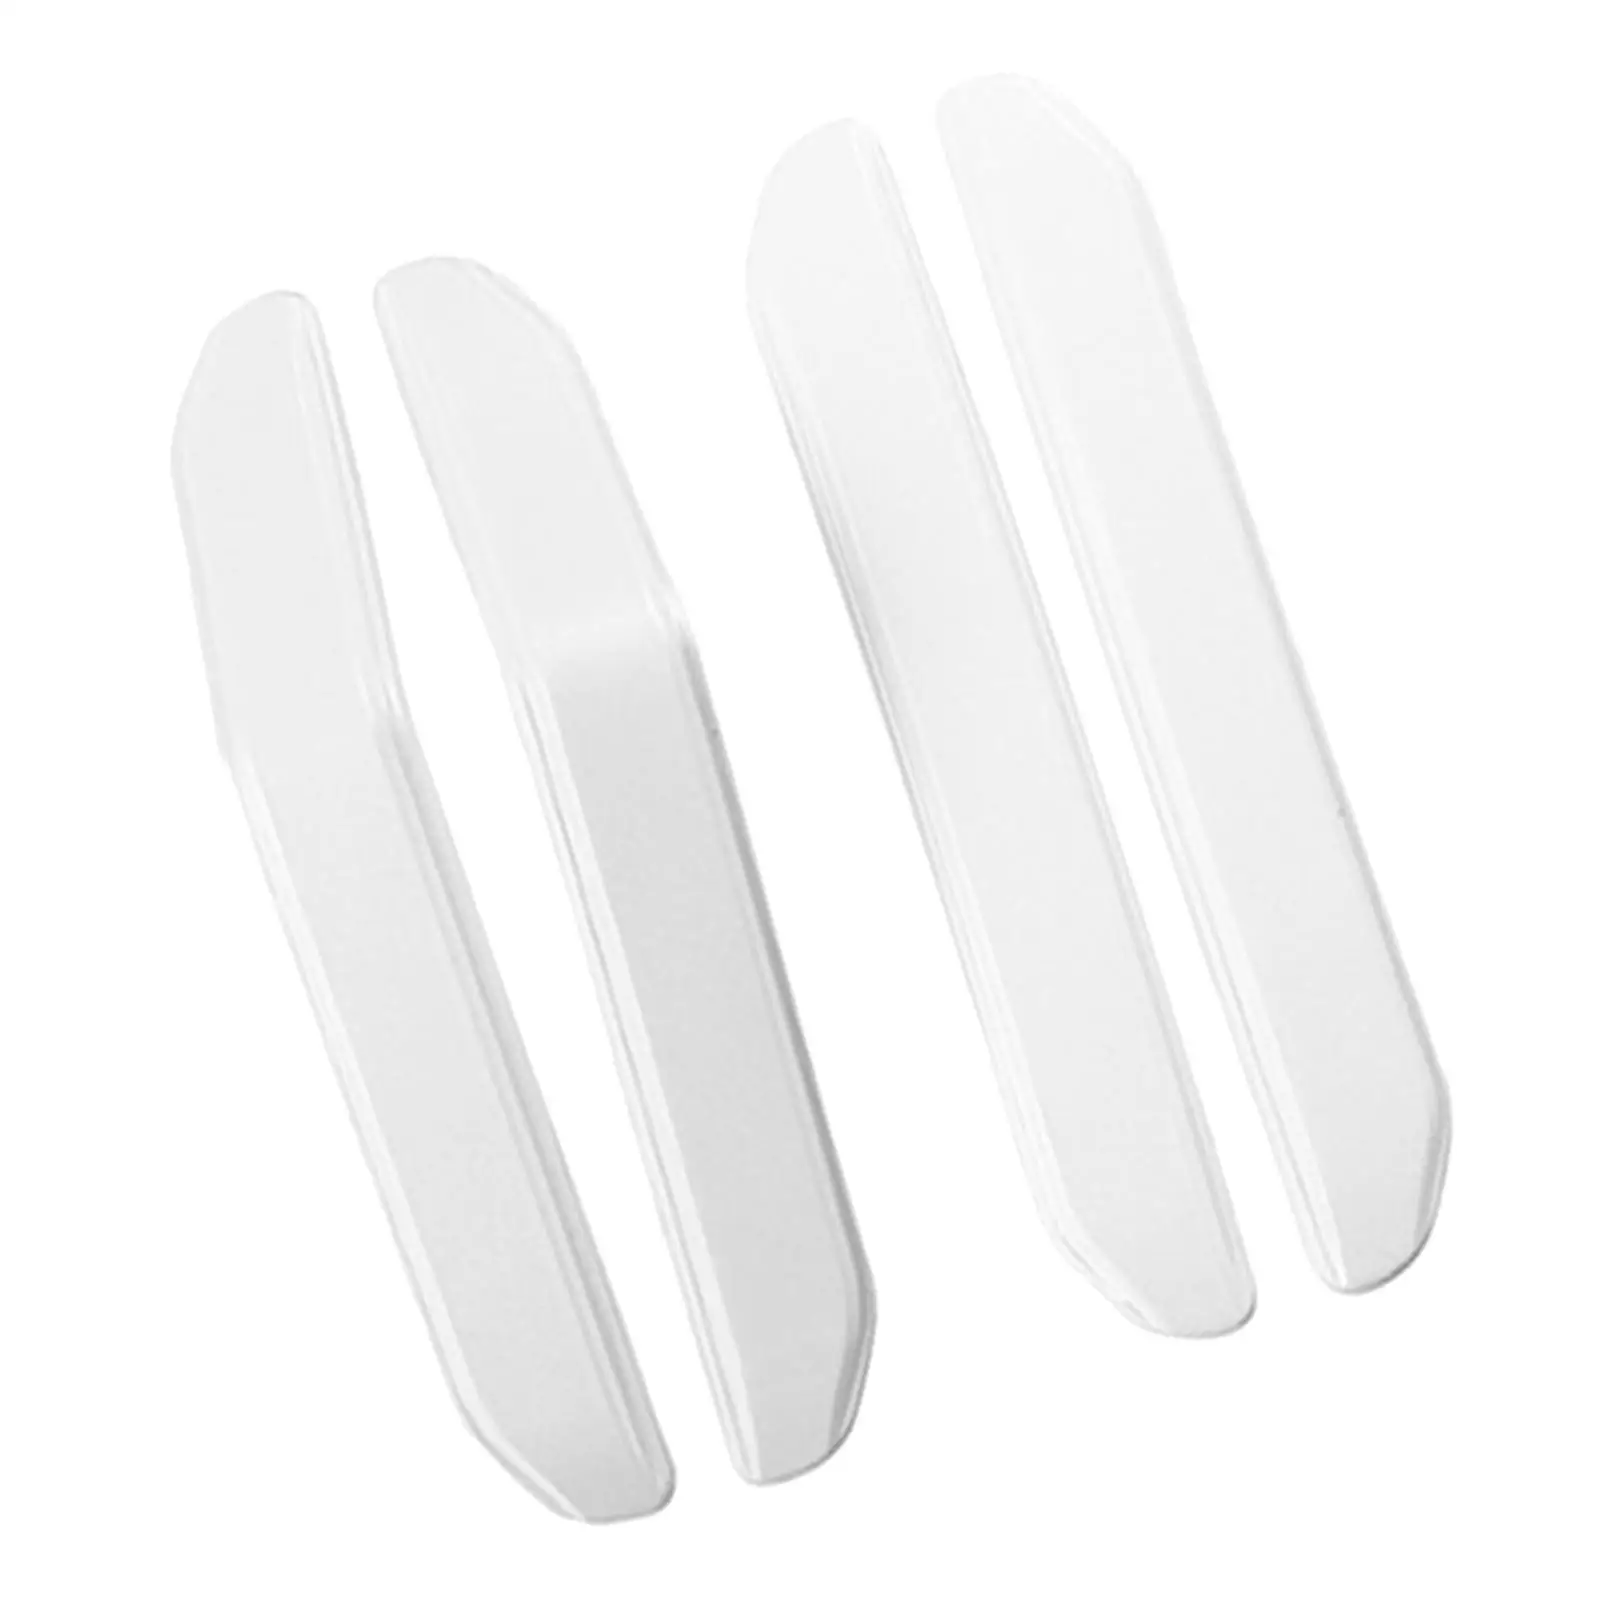 4Pcs Car Door Protector Strip Anti Collision for Sturdy